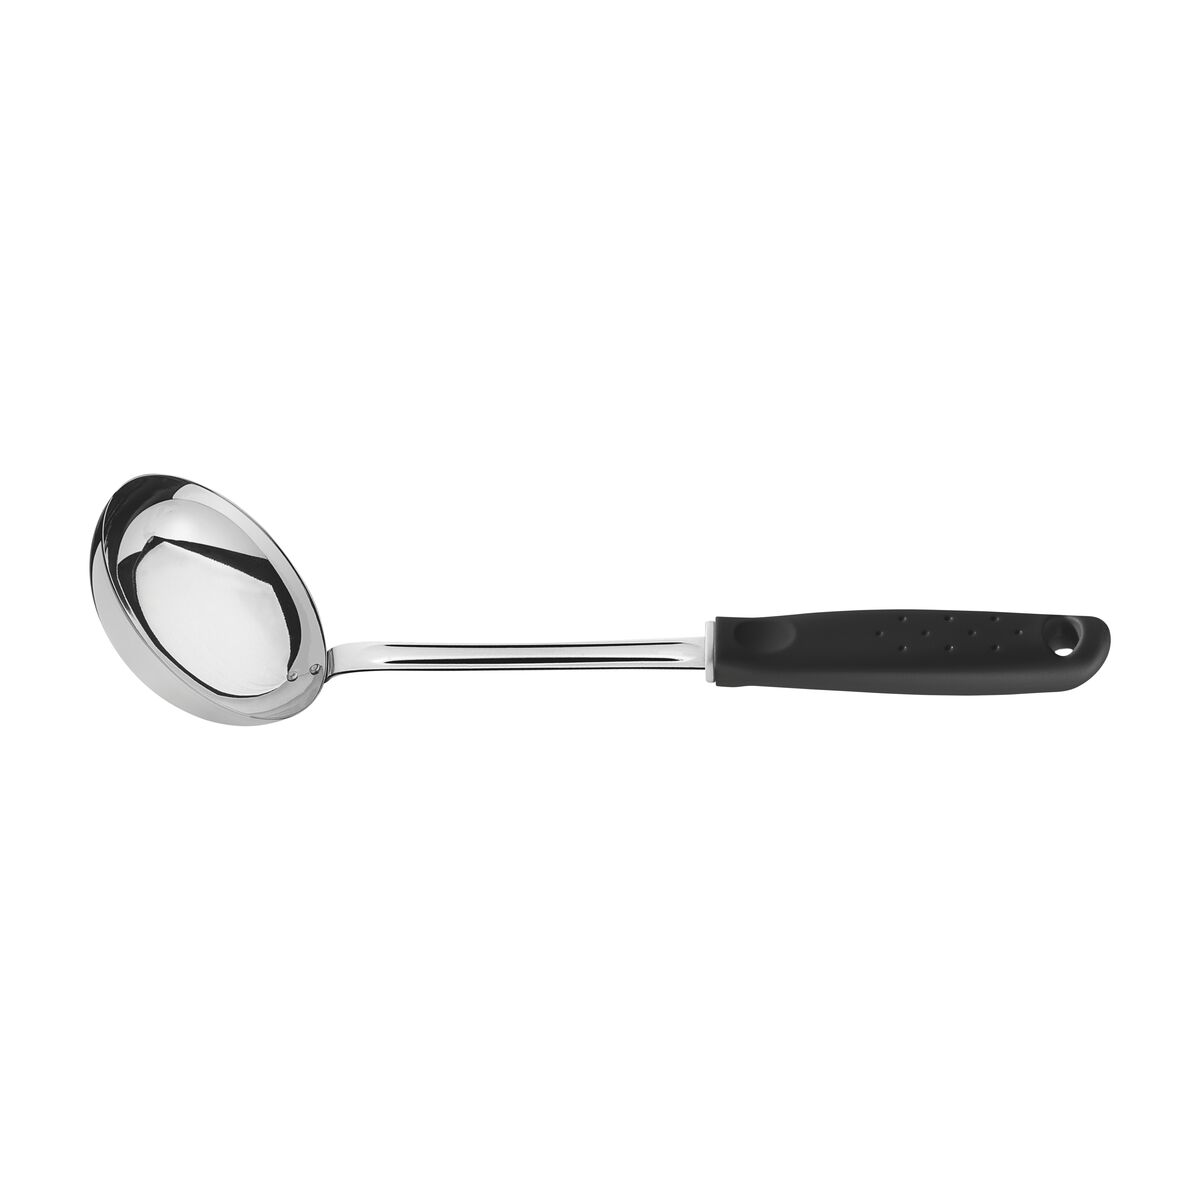 Tramontina Utilitá Stainless Steel Ladle with Black Polypropylene Handle